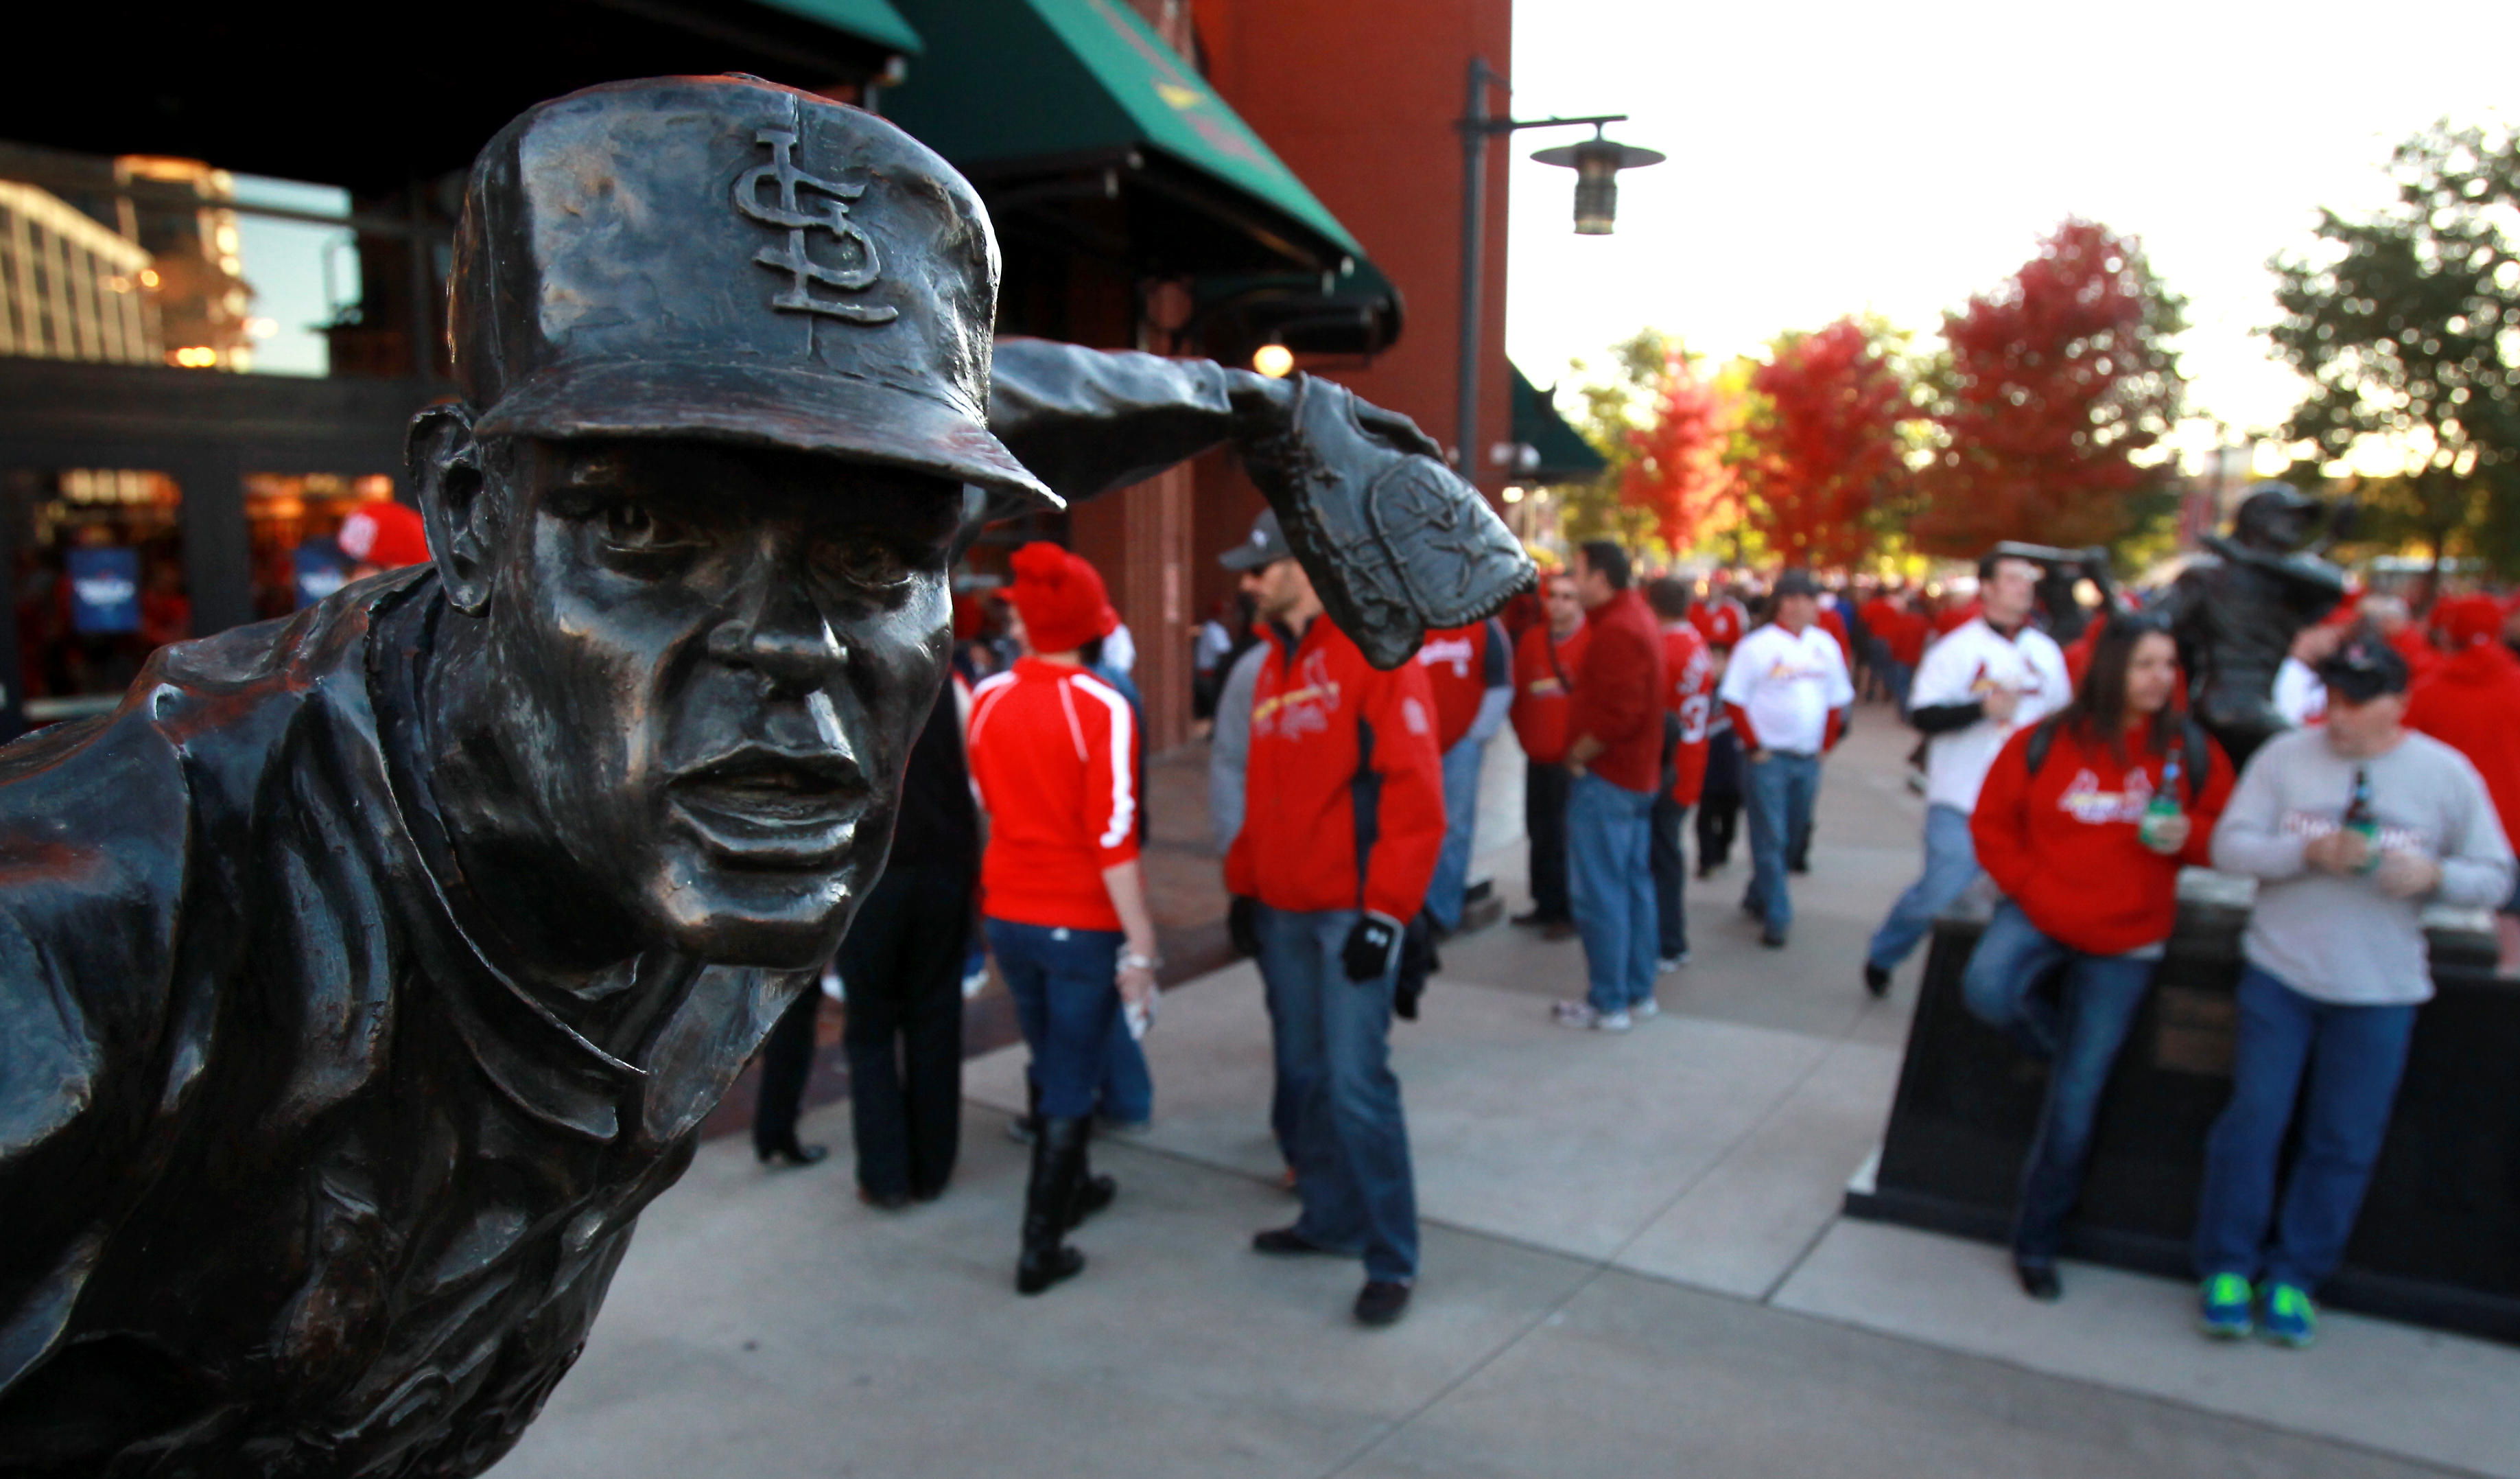 Bob Gibson, Cardinals Hall of Fame pitcher, dead at 84 of cancer